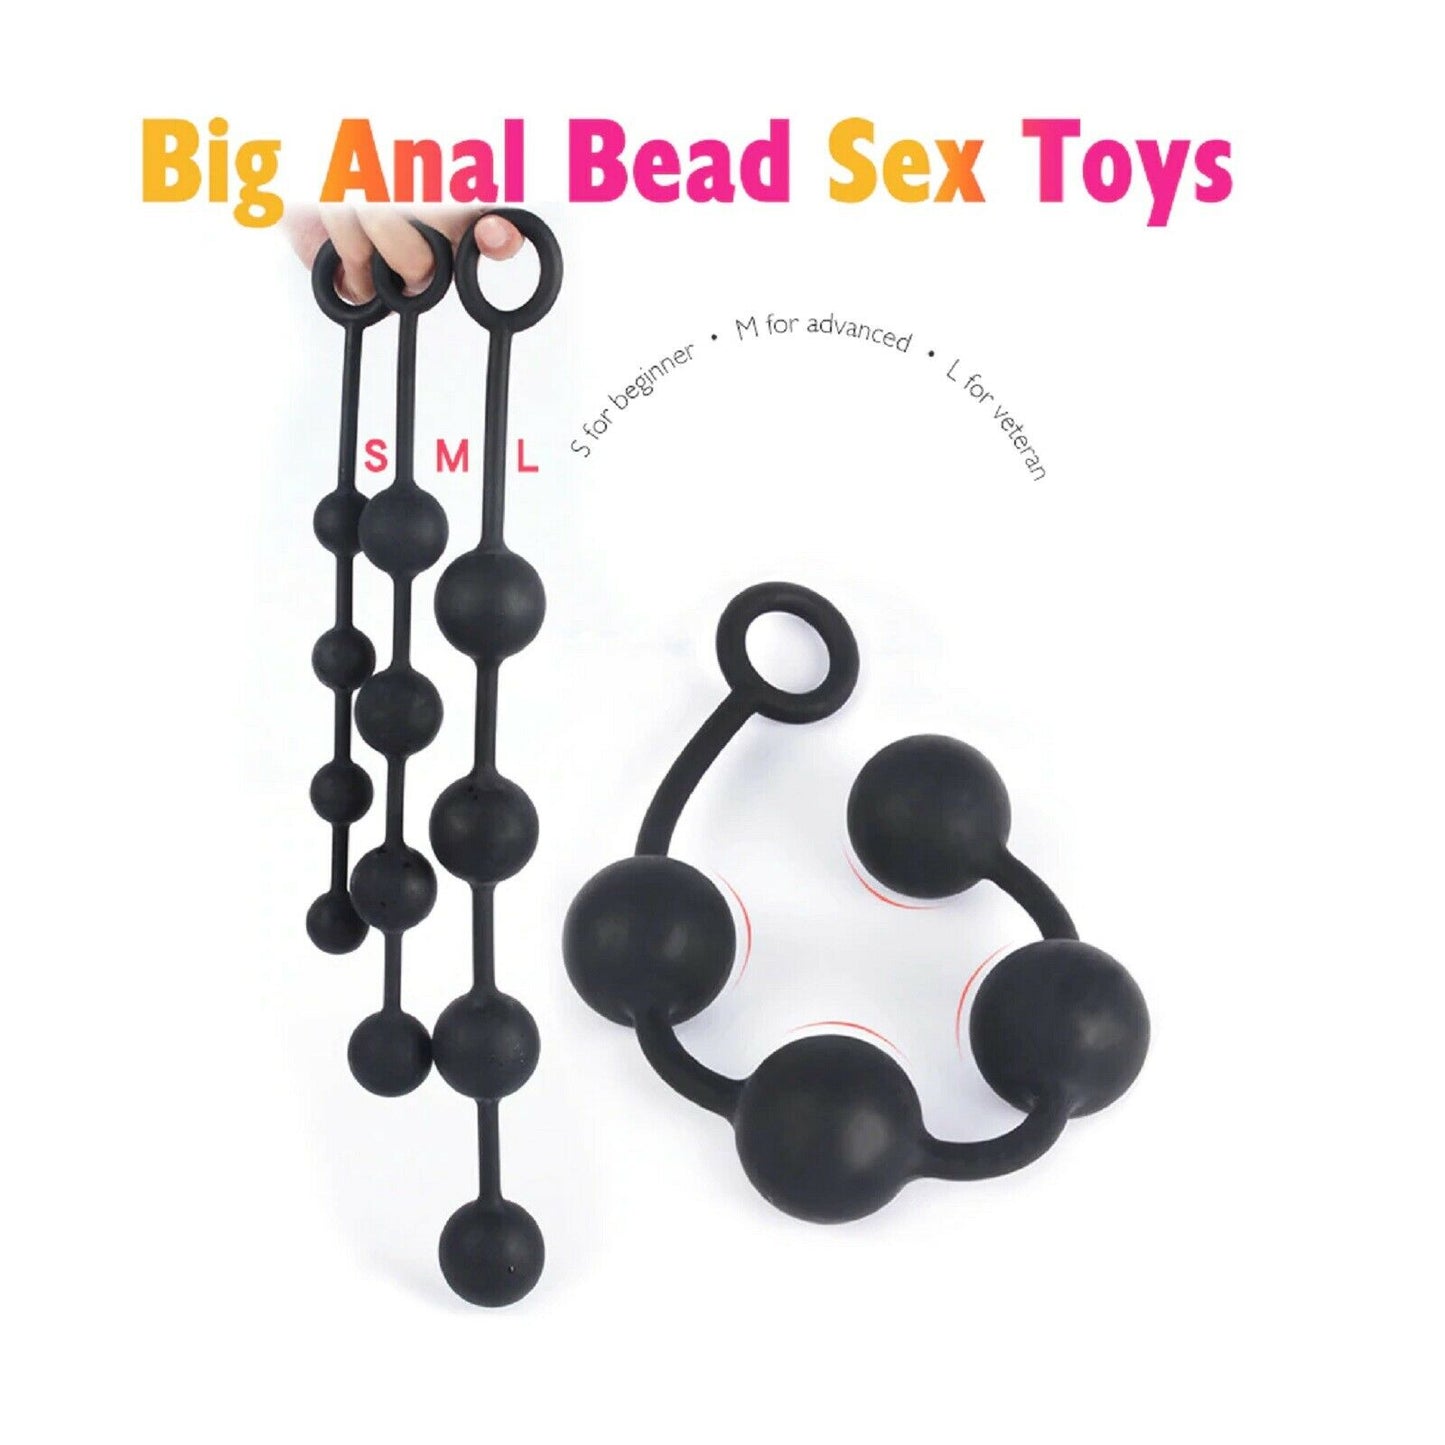 Giant Silicone Extra Large Big Anal Beads Dildo Dong Fat Butt Plug HUGE Sex Toy